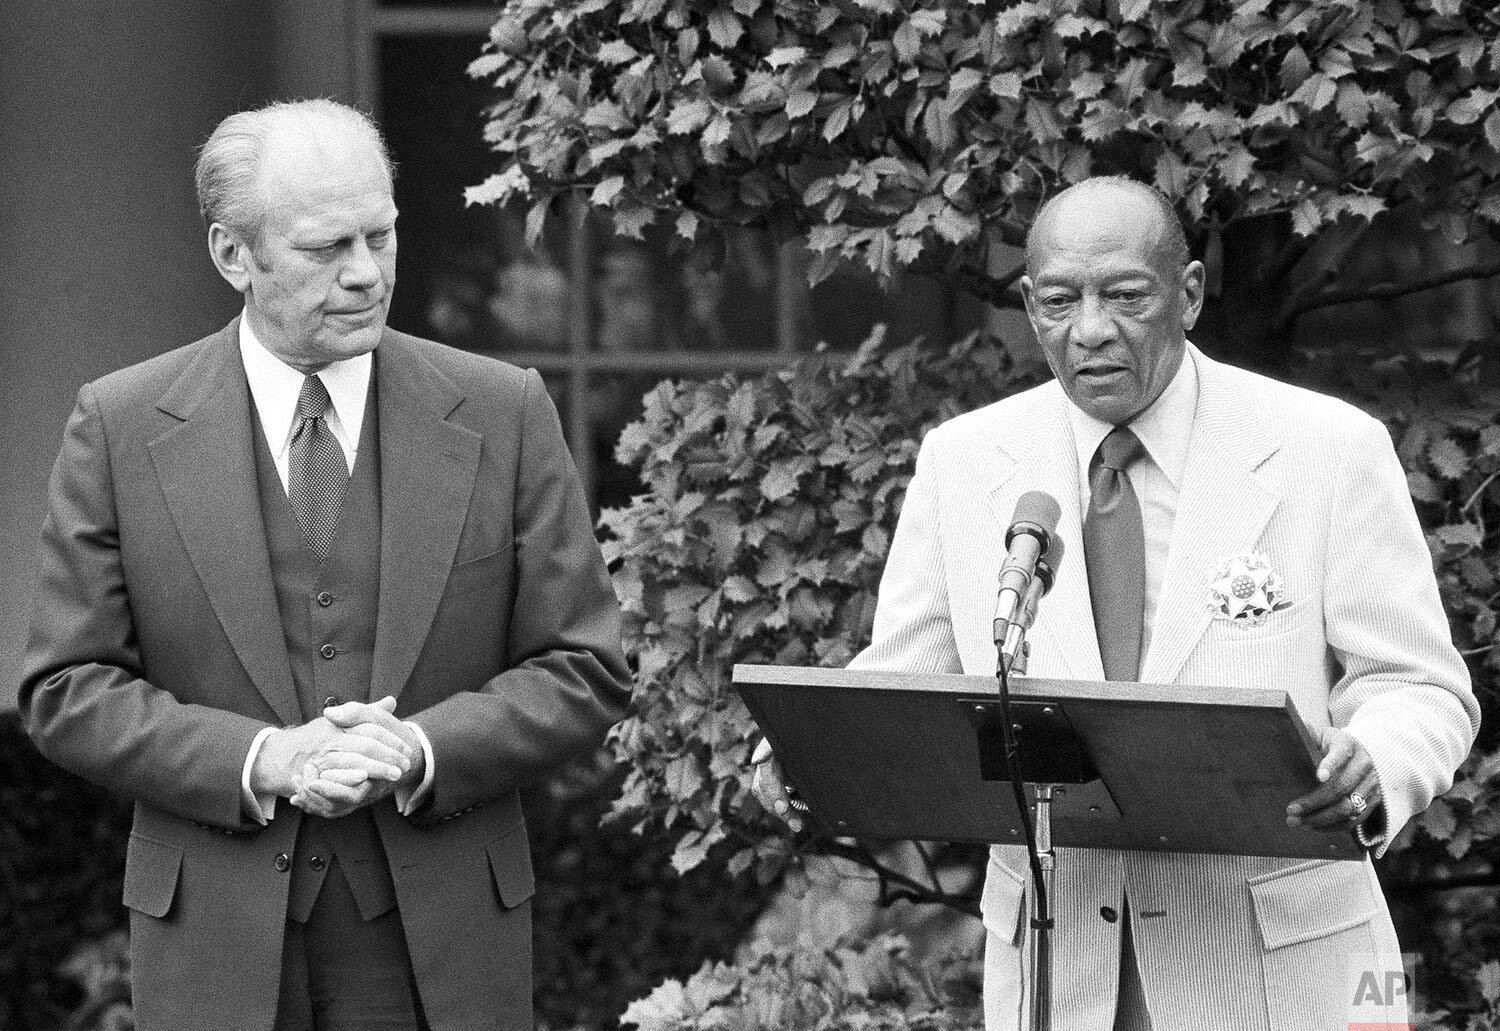  President Gerald Ford with Olympic gold medalist Jesse Owens after presenting him with the Medal of Freedom in a White House East Garden ceremony in Washington on August 5, 1976. Ford feted United States Olympic teams with a reception inside the Exe